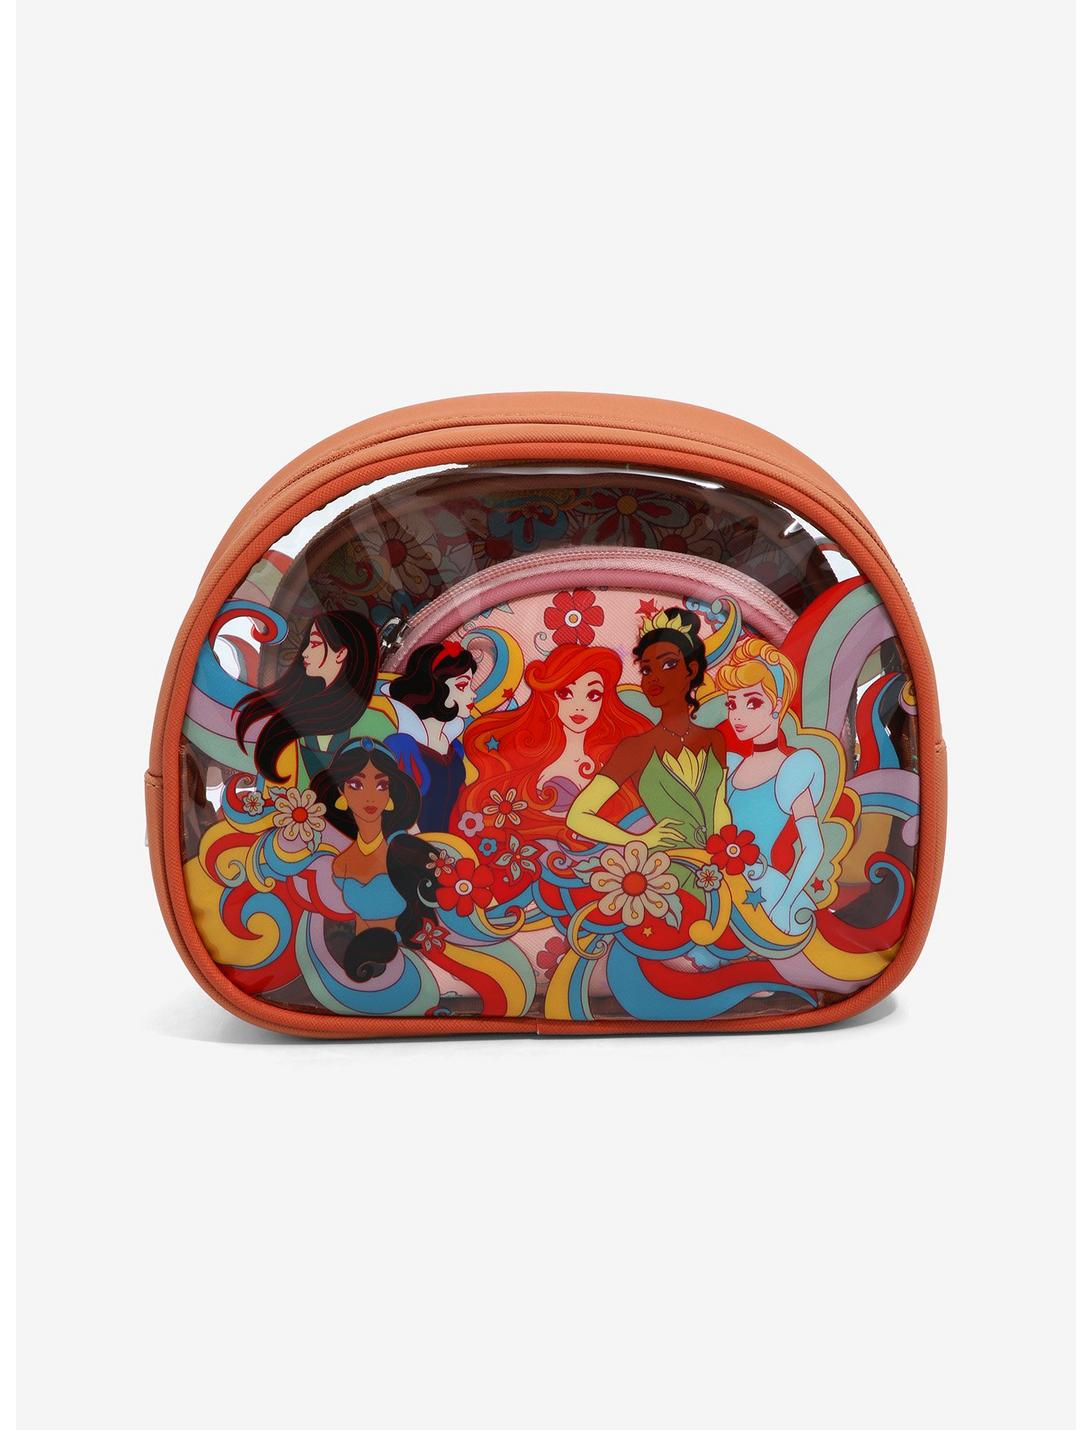 Disney Princess Groovy Group Portrait Cosmetic Bag Set - BoxLunch Exclusive, , hi-res